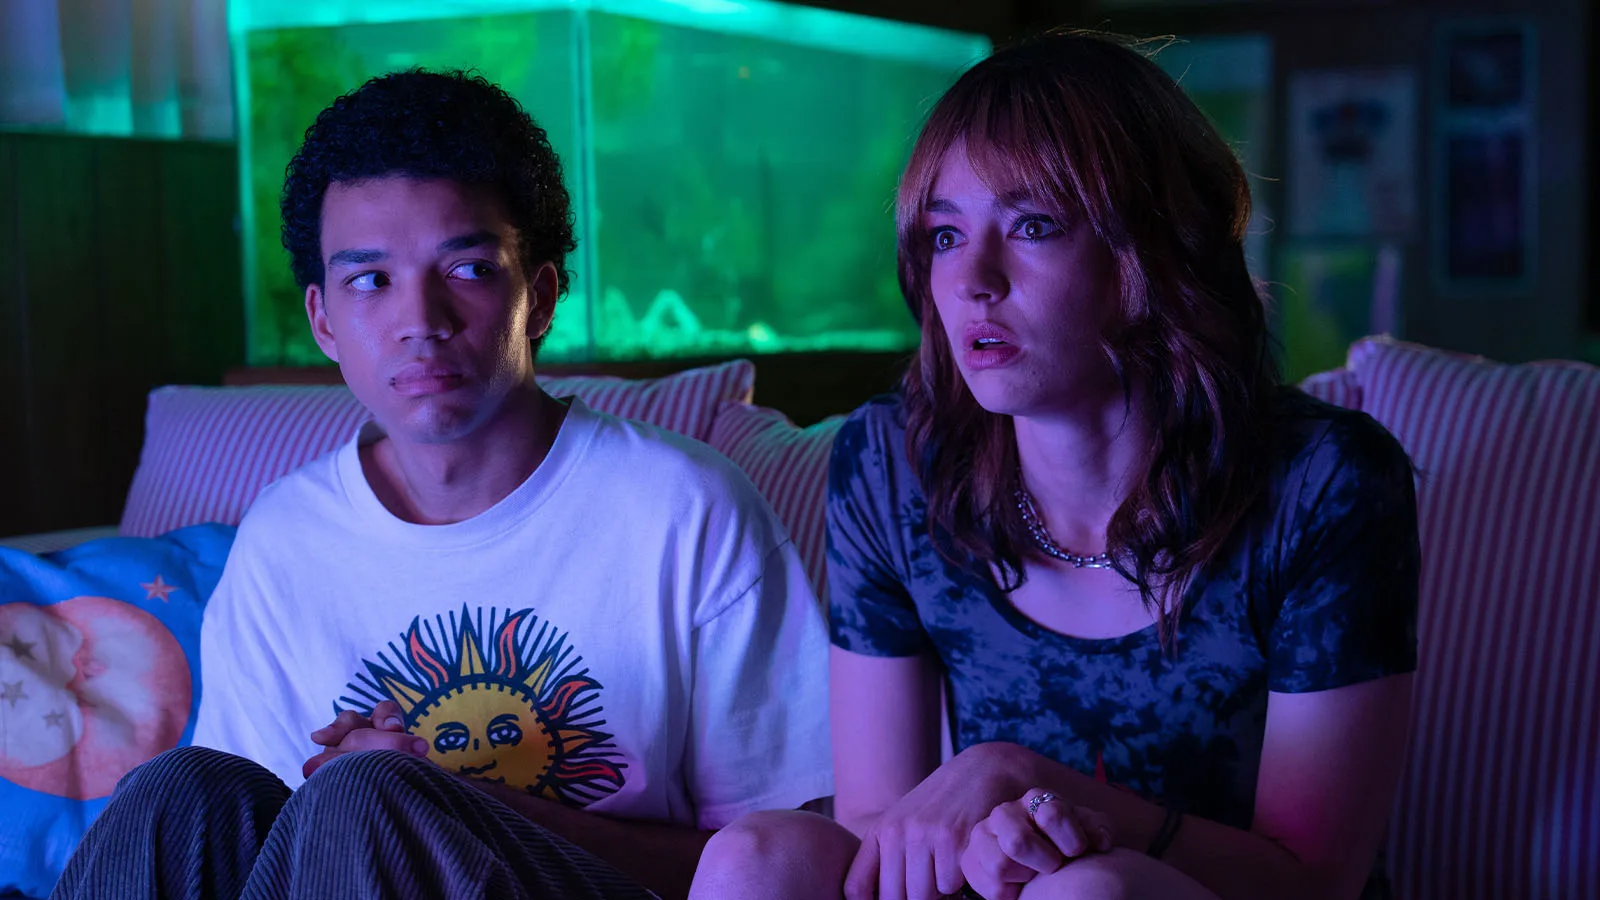 Two friends stare at a glowing TV screen in this promotional still for I Saw the TV Glow.